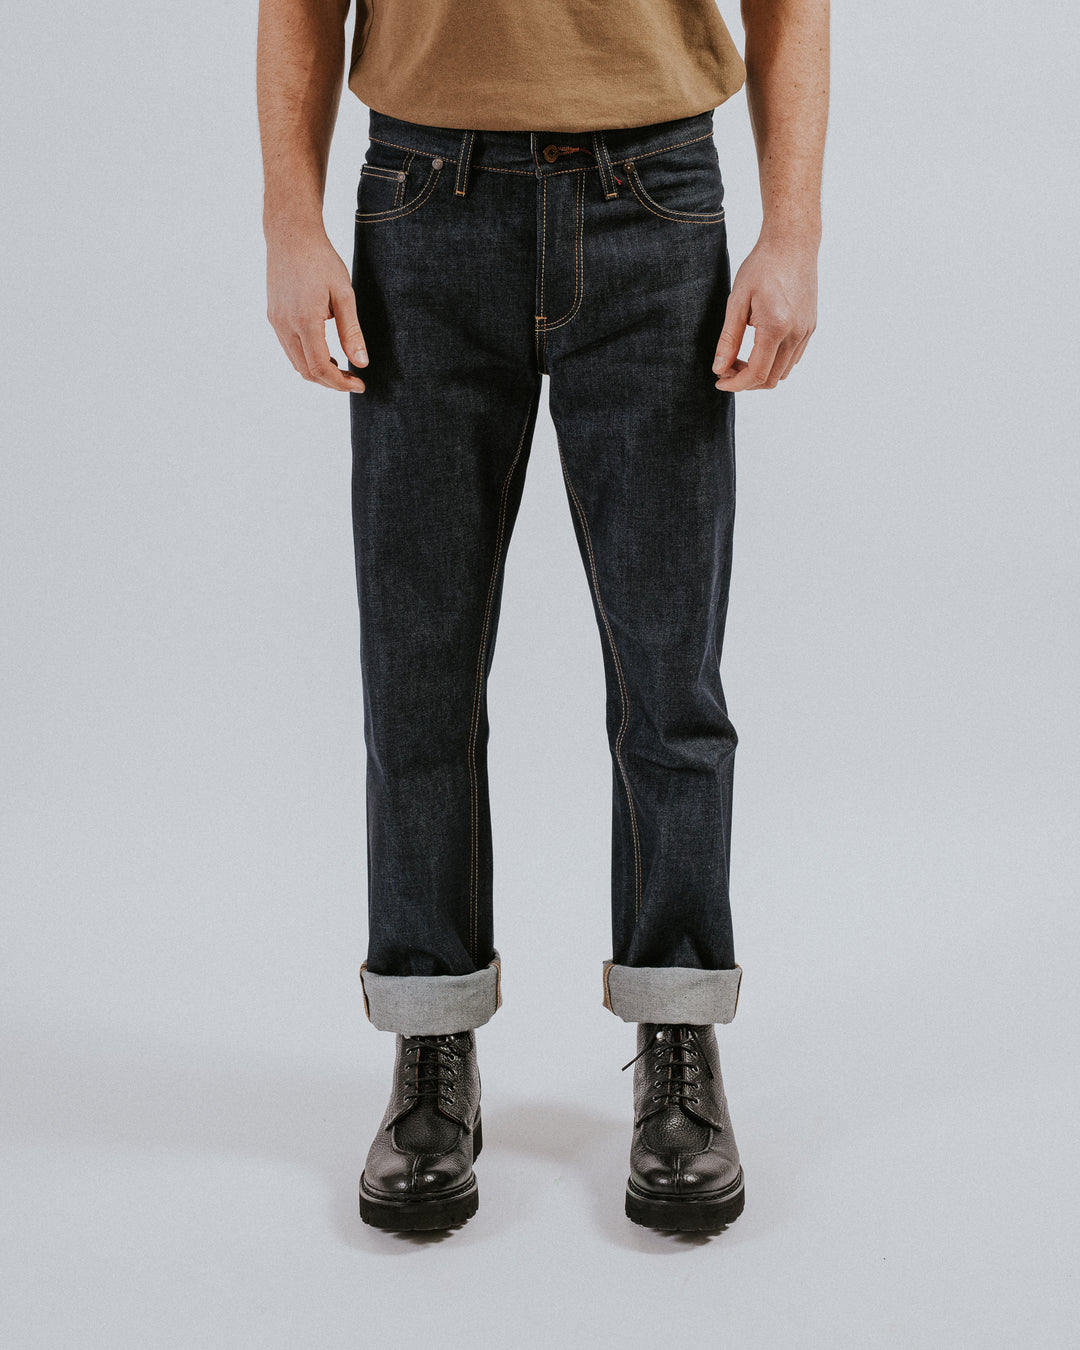 Hiut Denim Co. | We make jeans. That's it. Do One Thing Well